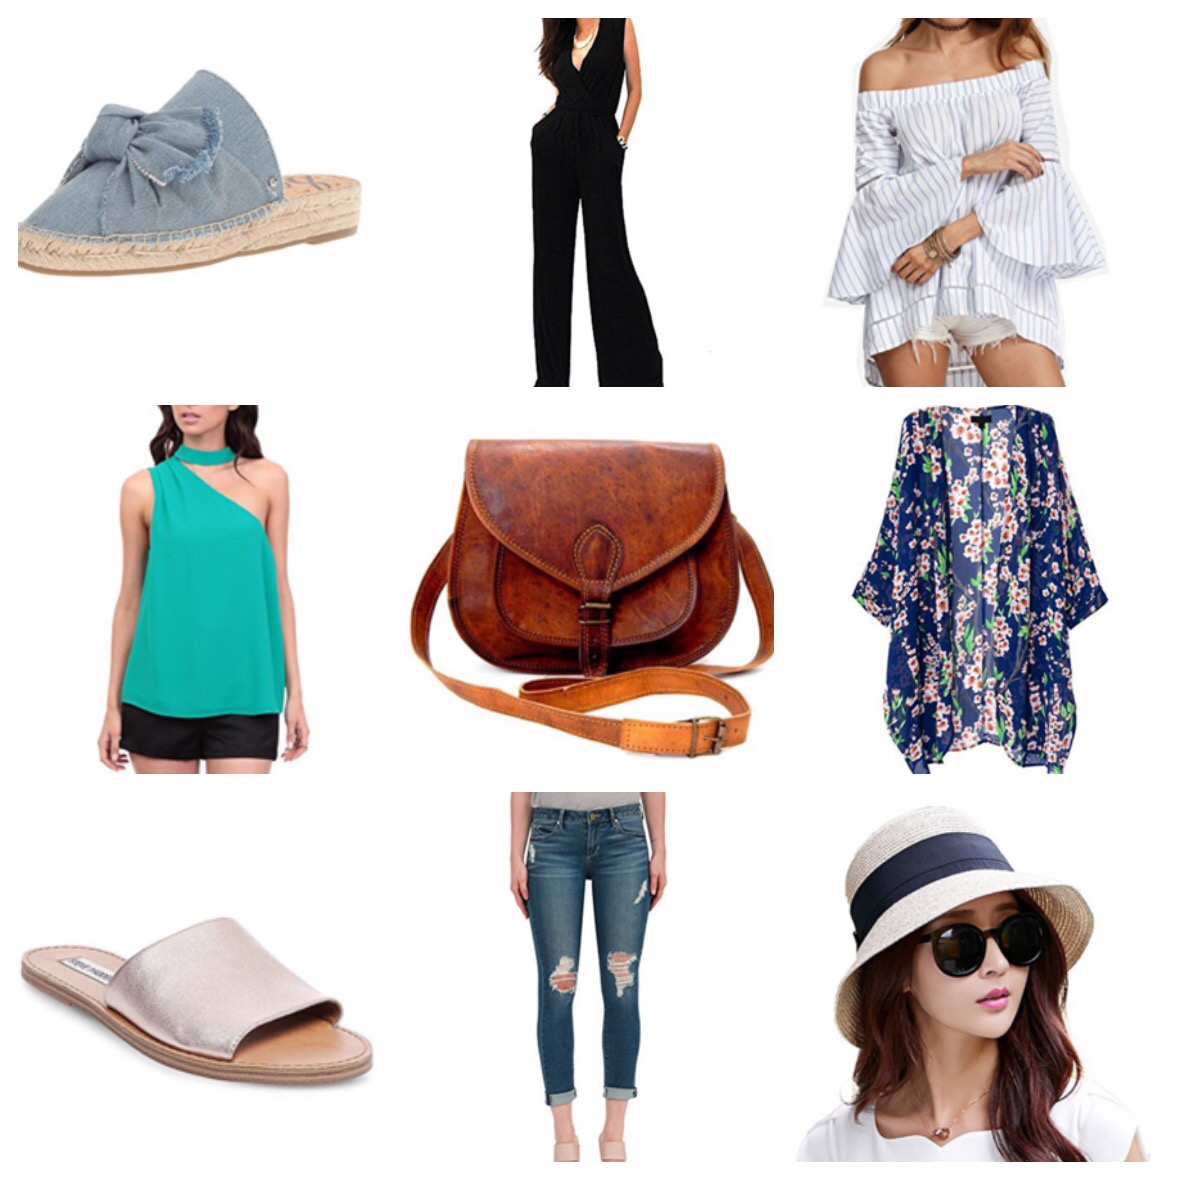 Summer Style : Amazon Fashion Must Haves for the Season - The Lillie Bag